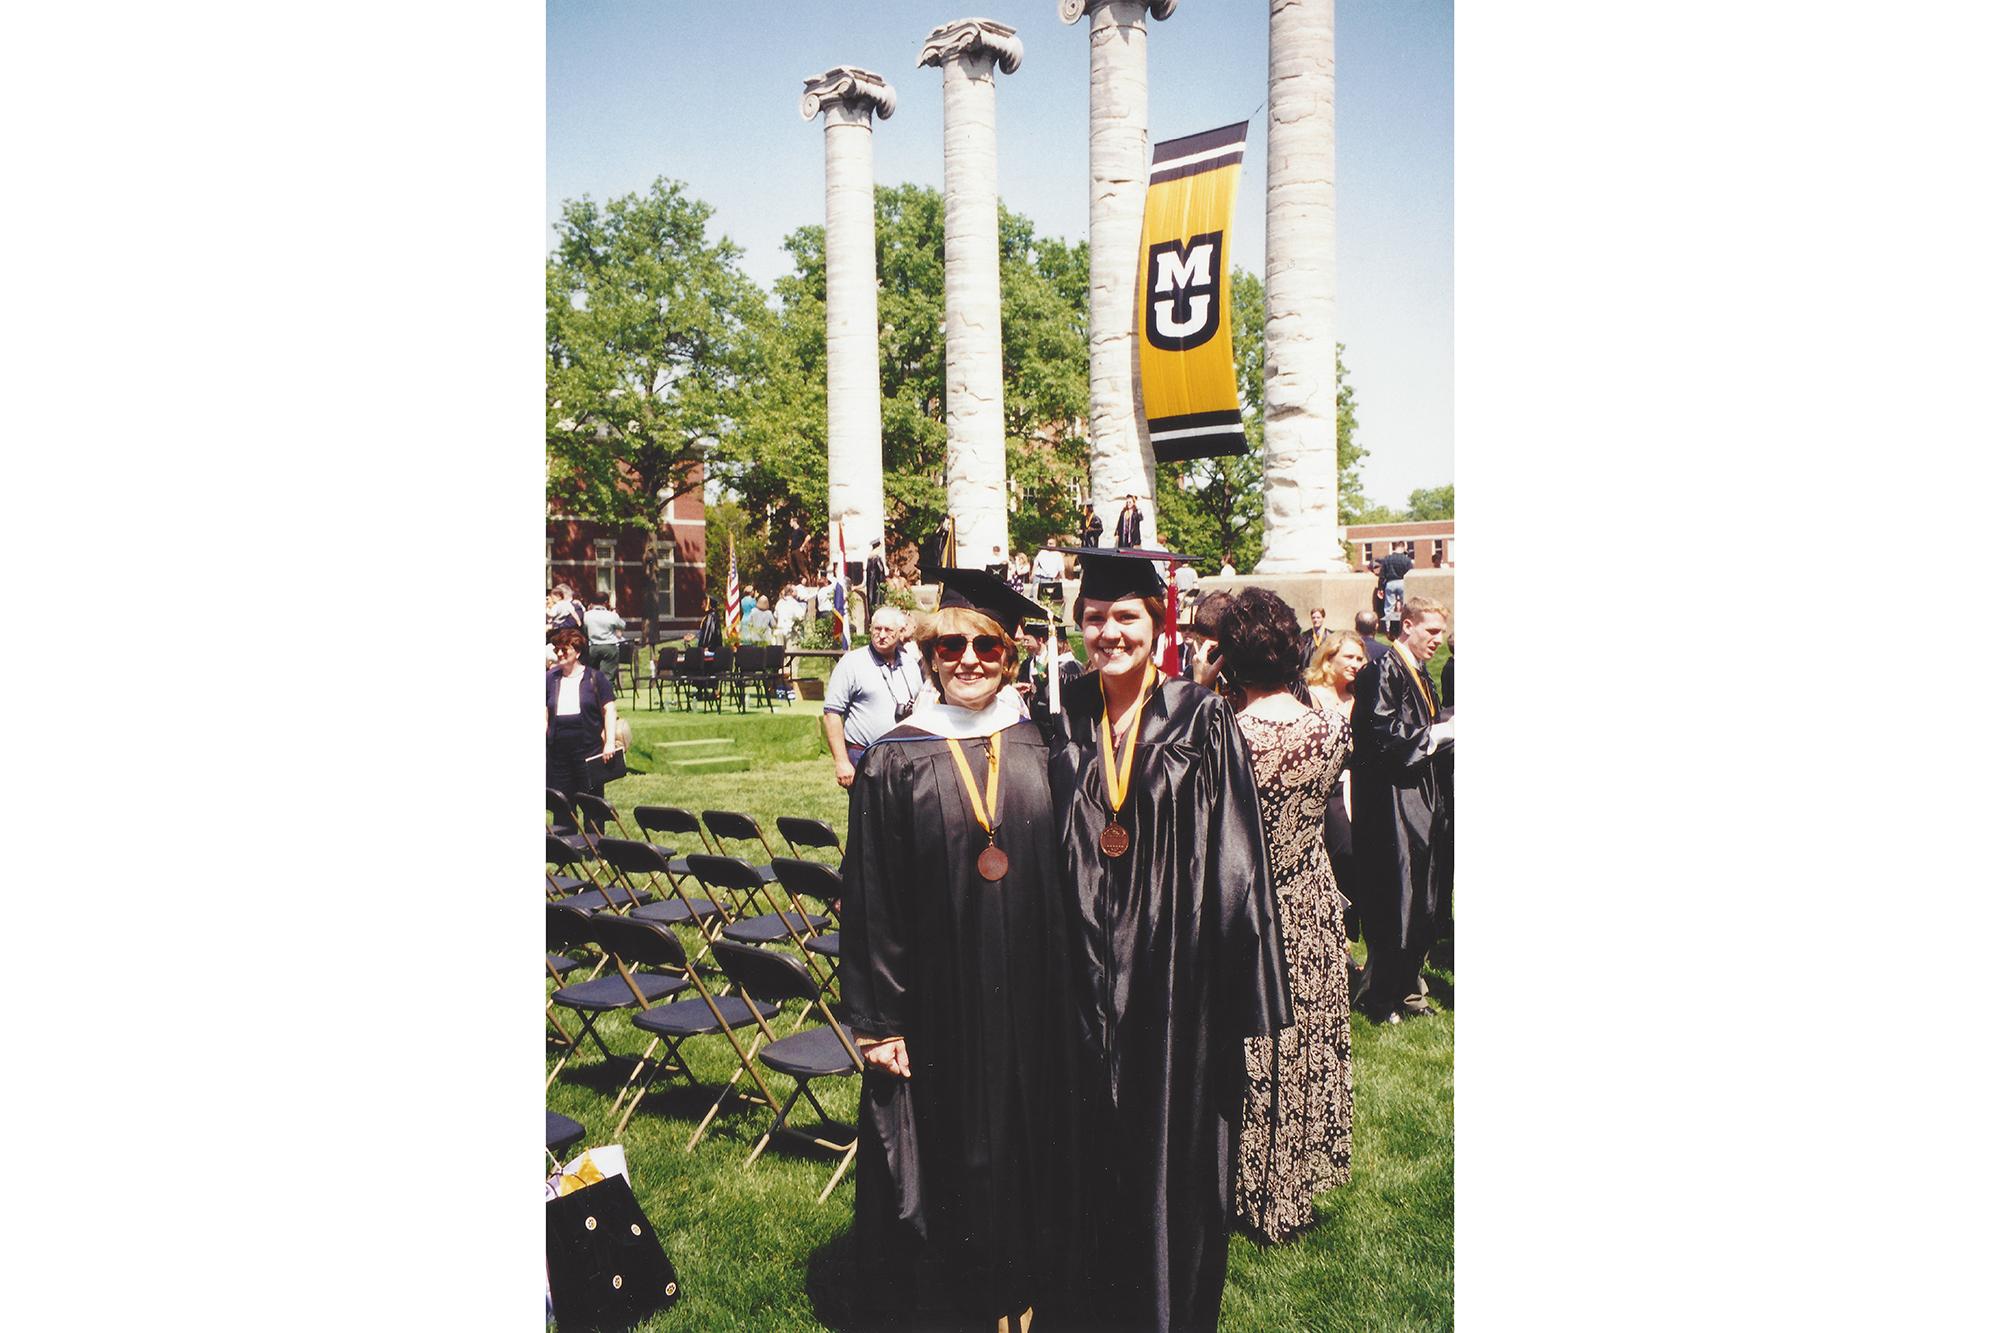 Megan Silvey and Suzette Heiman pose for a photo during an outdoor graduation ceremony in front of the columns